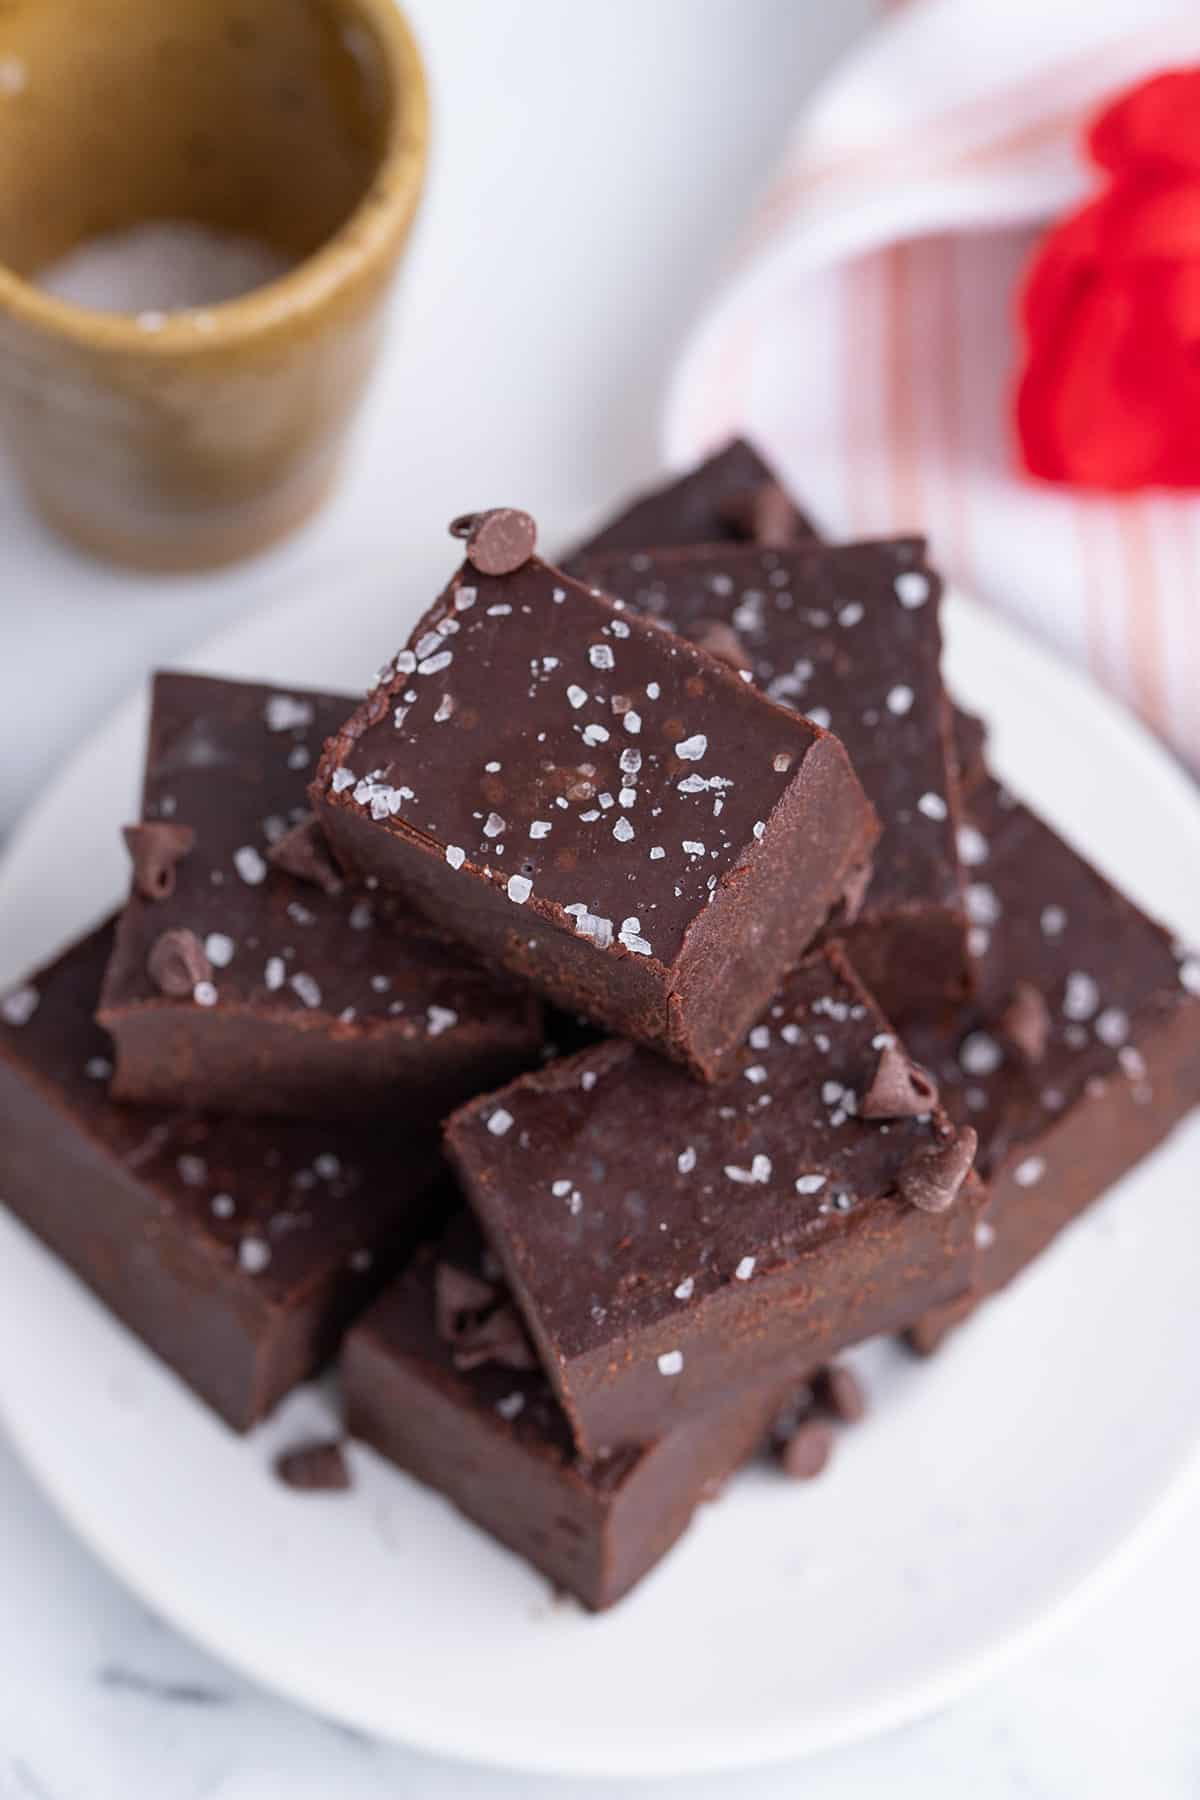 Top down image of a plate piled high with sugar-free chocolate fudge.